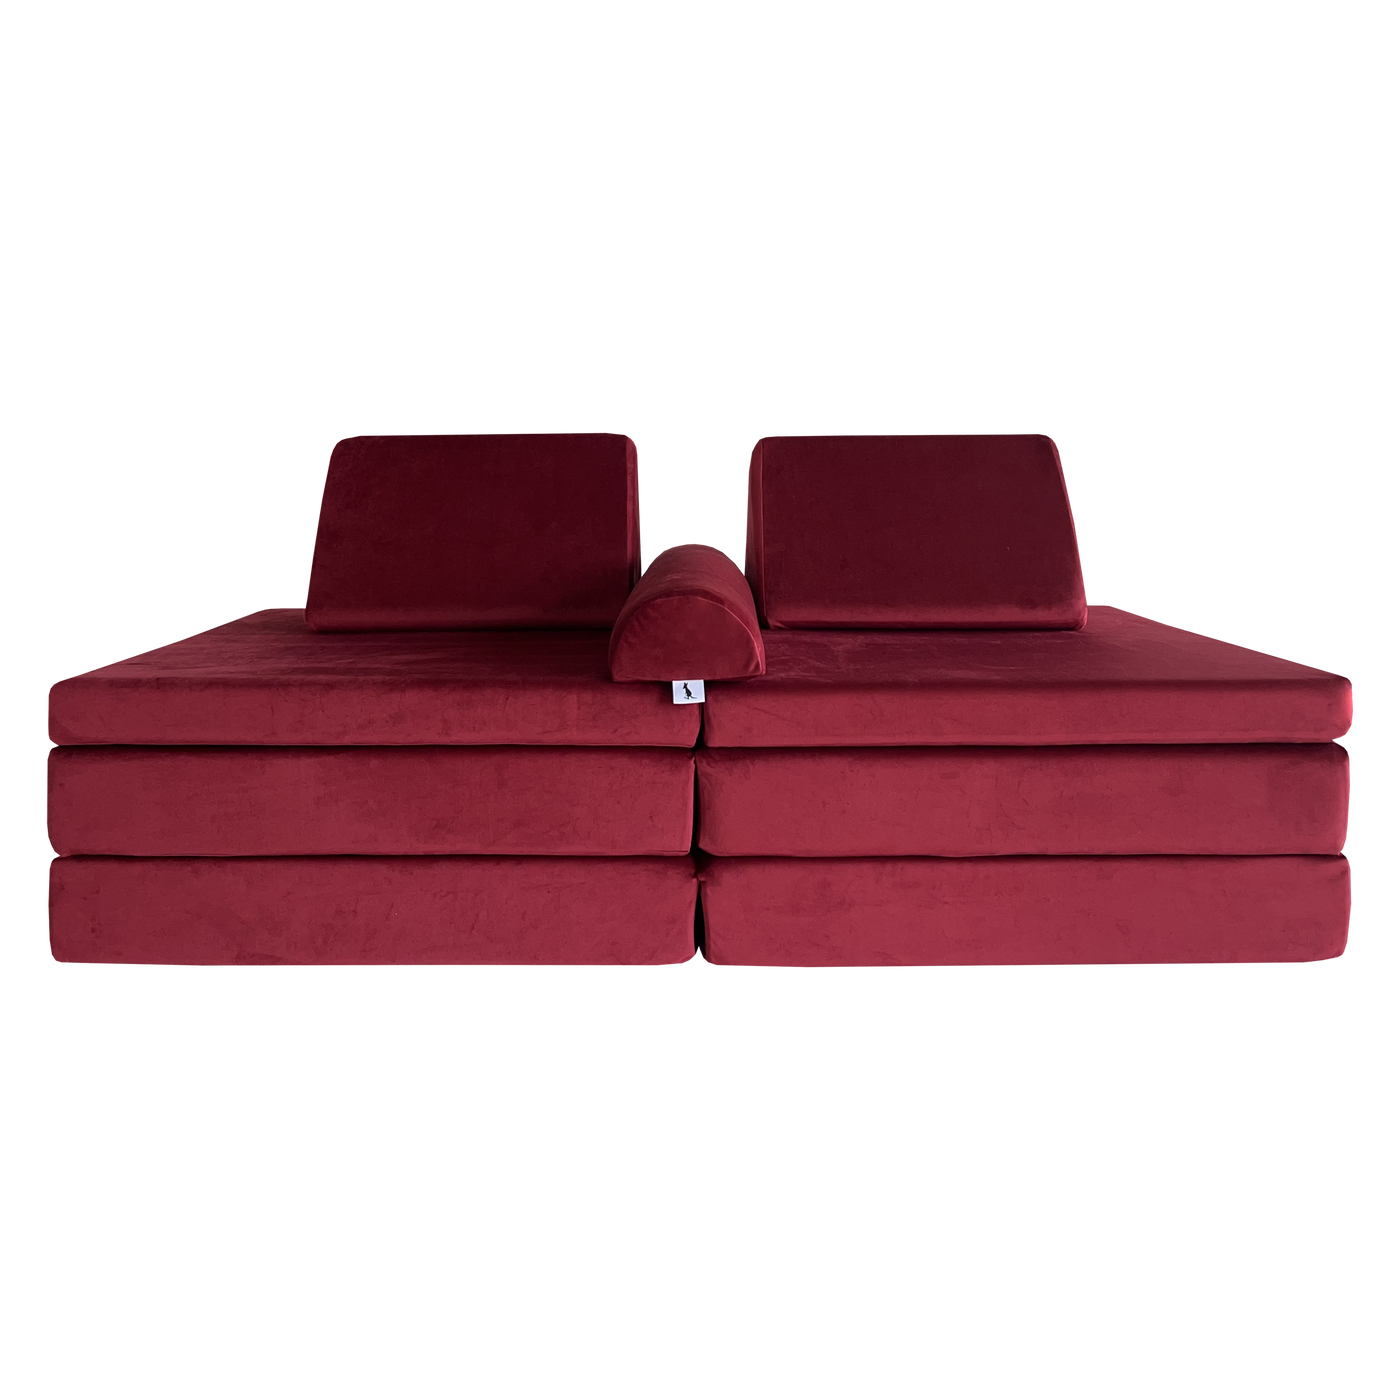 Jewel Tone Play Couch Cover Set: Super Joey Edition